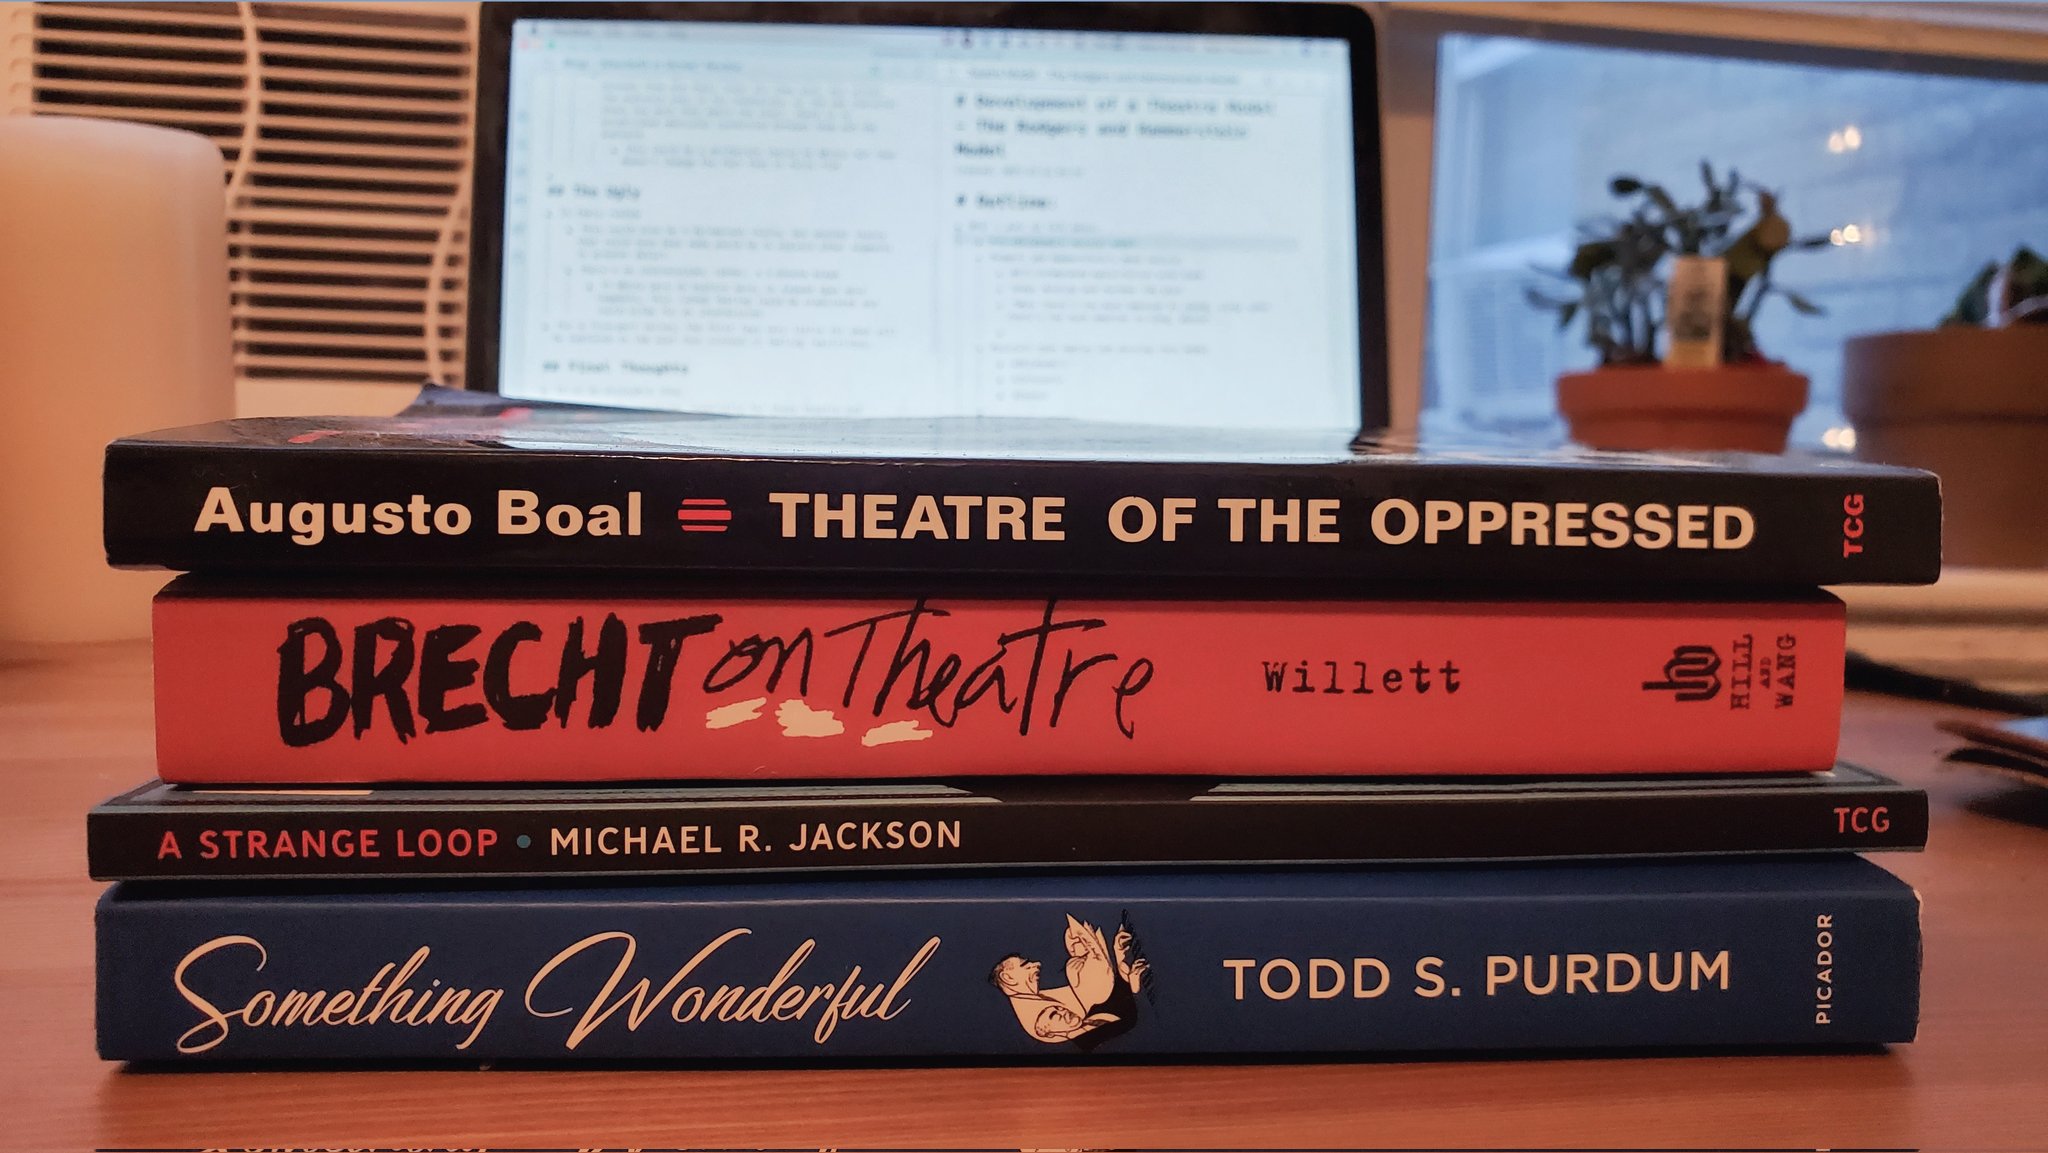 Stack of theatre books, including "Theatre of the oppressed," "Brecht on Theatre," "A Strange Loop," and "Something Wonderful"